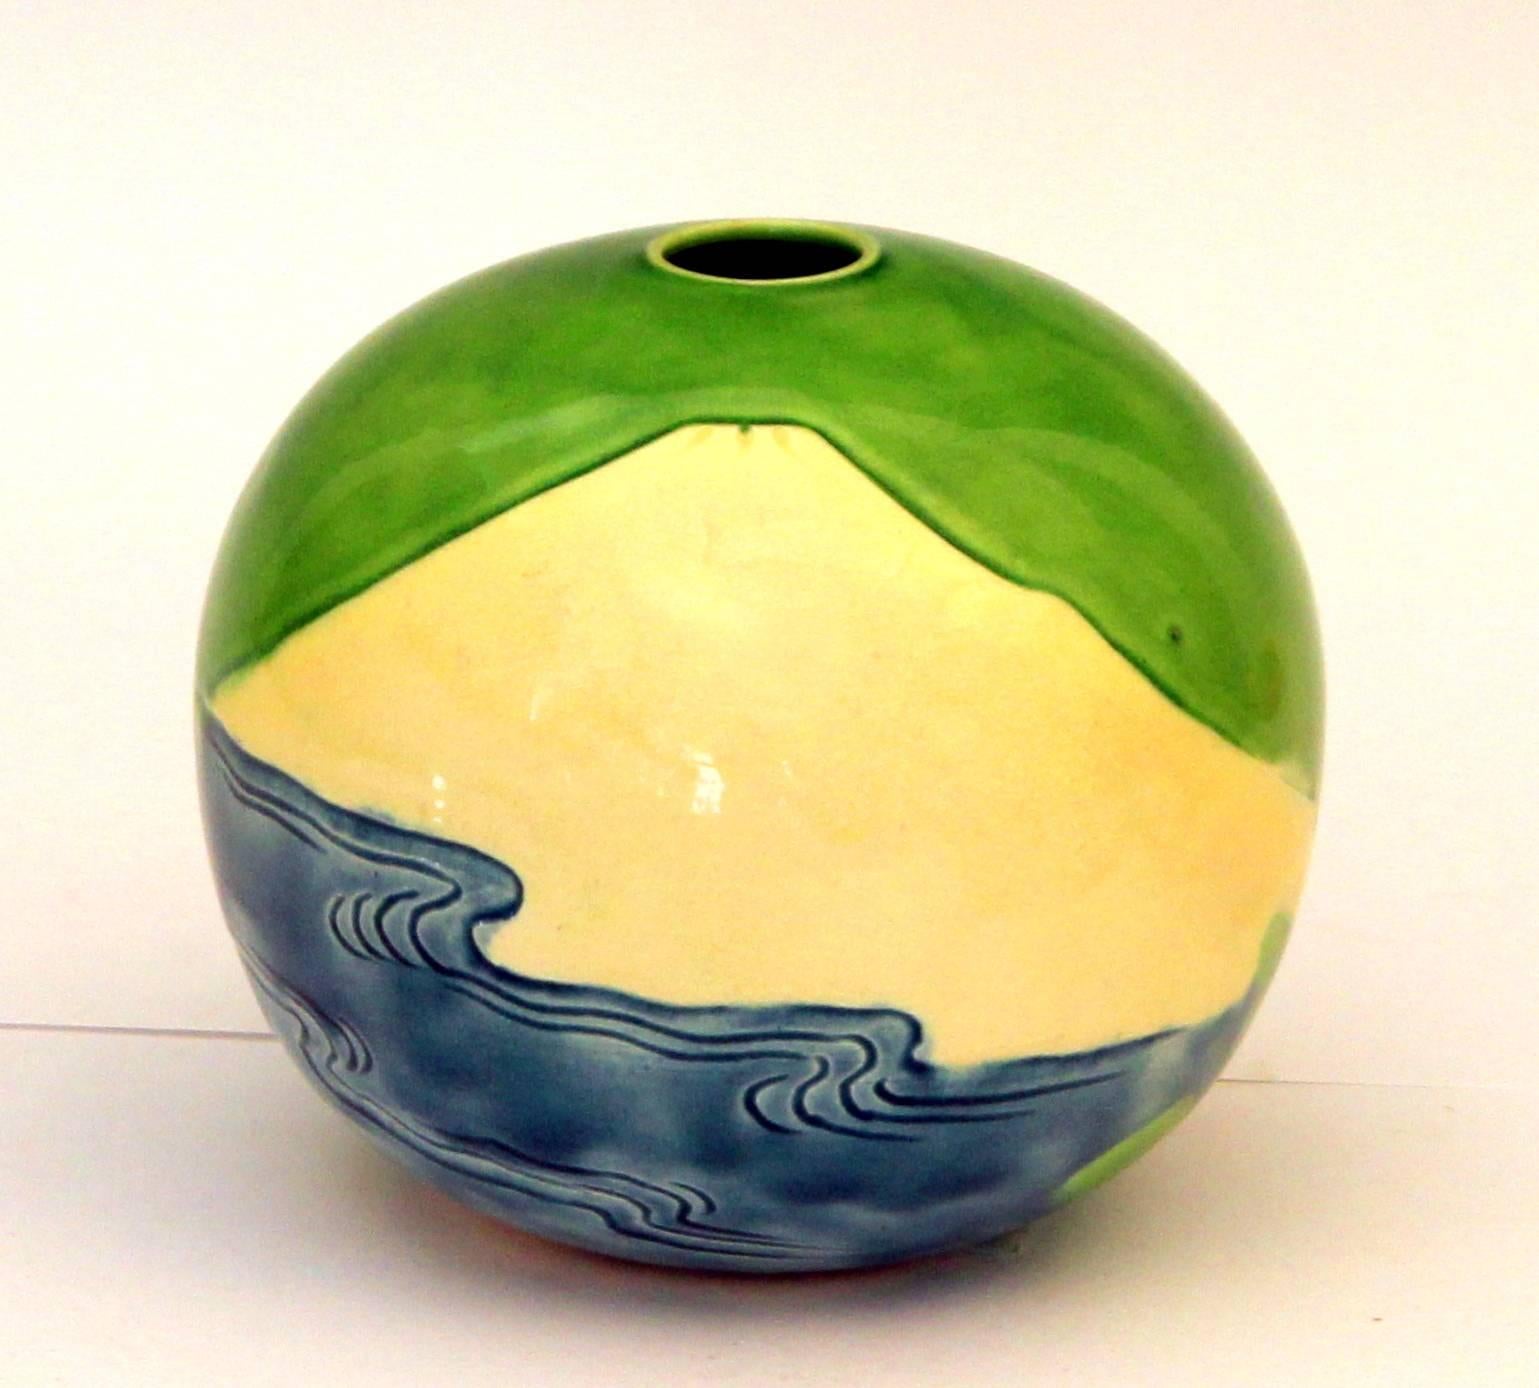 Spherical vase with incised image of a mountain above the ocean against a vibrant lime green sky. Impressed Kiln mark. 5